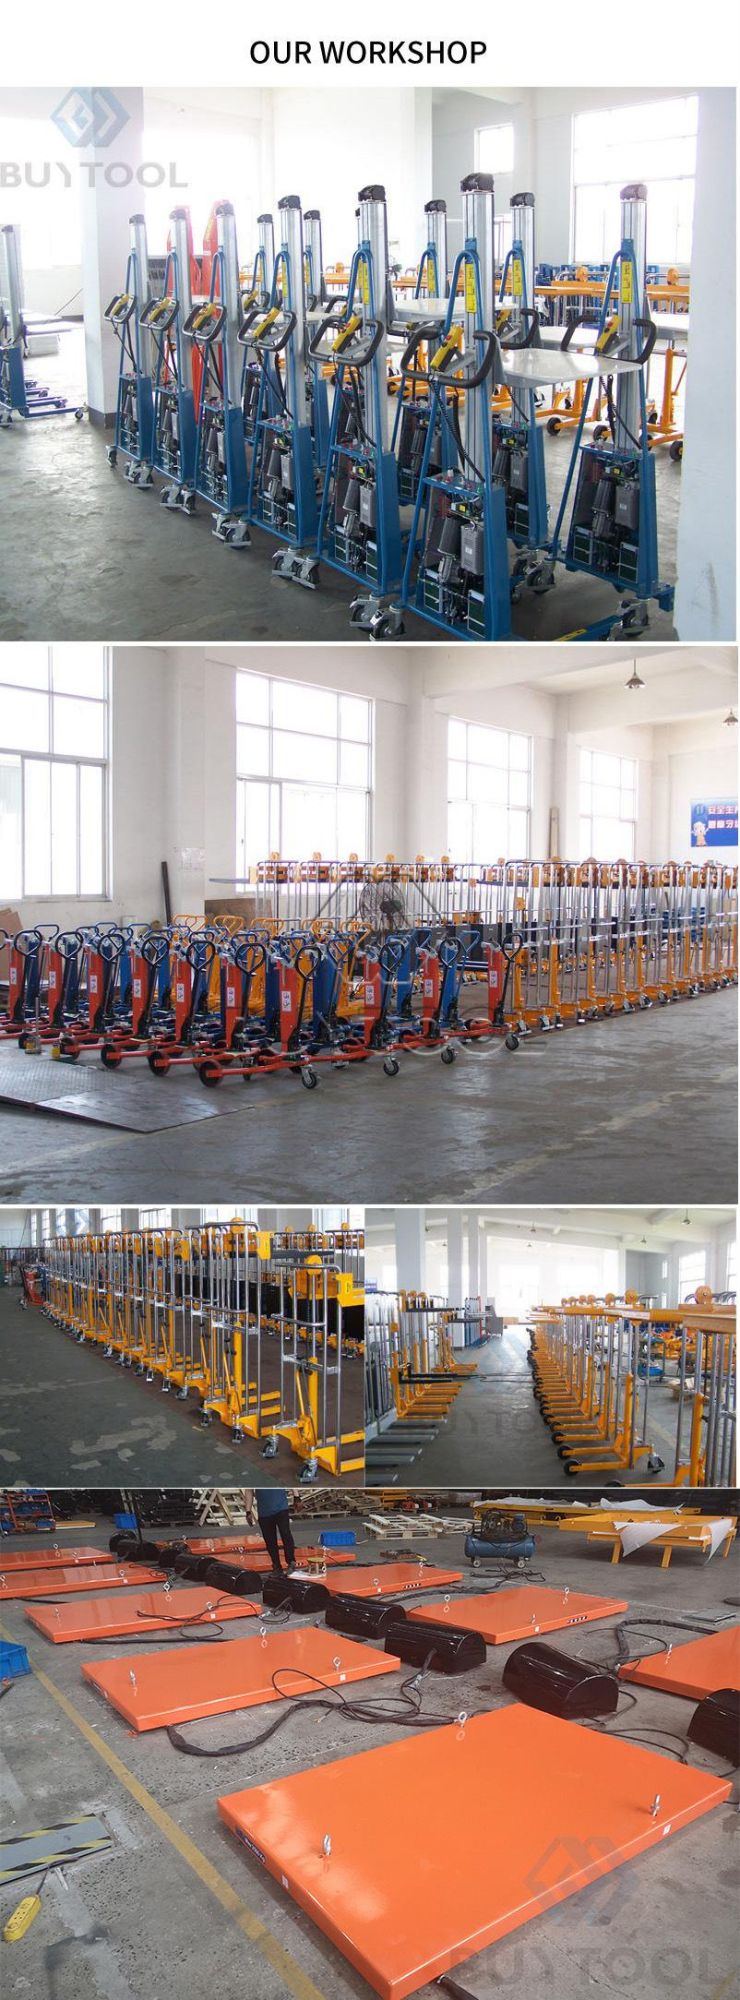 Standard-Type Lift Table with Heavy Duty Design